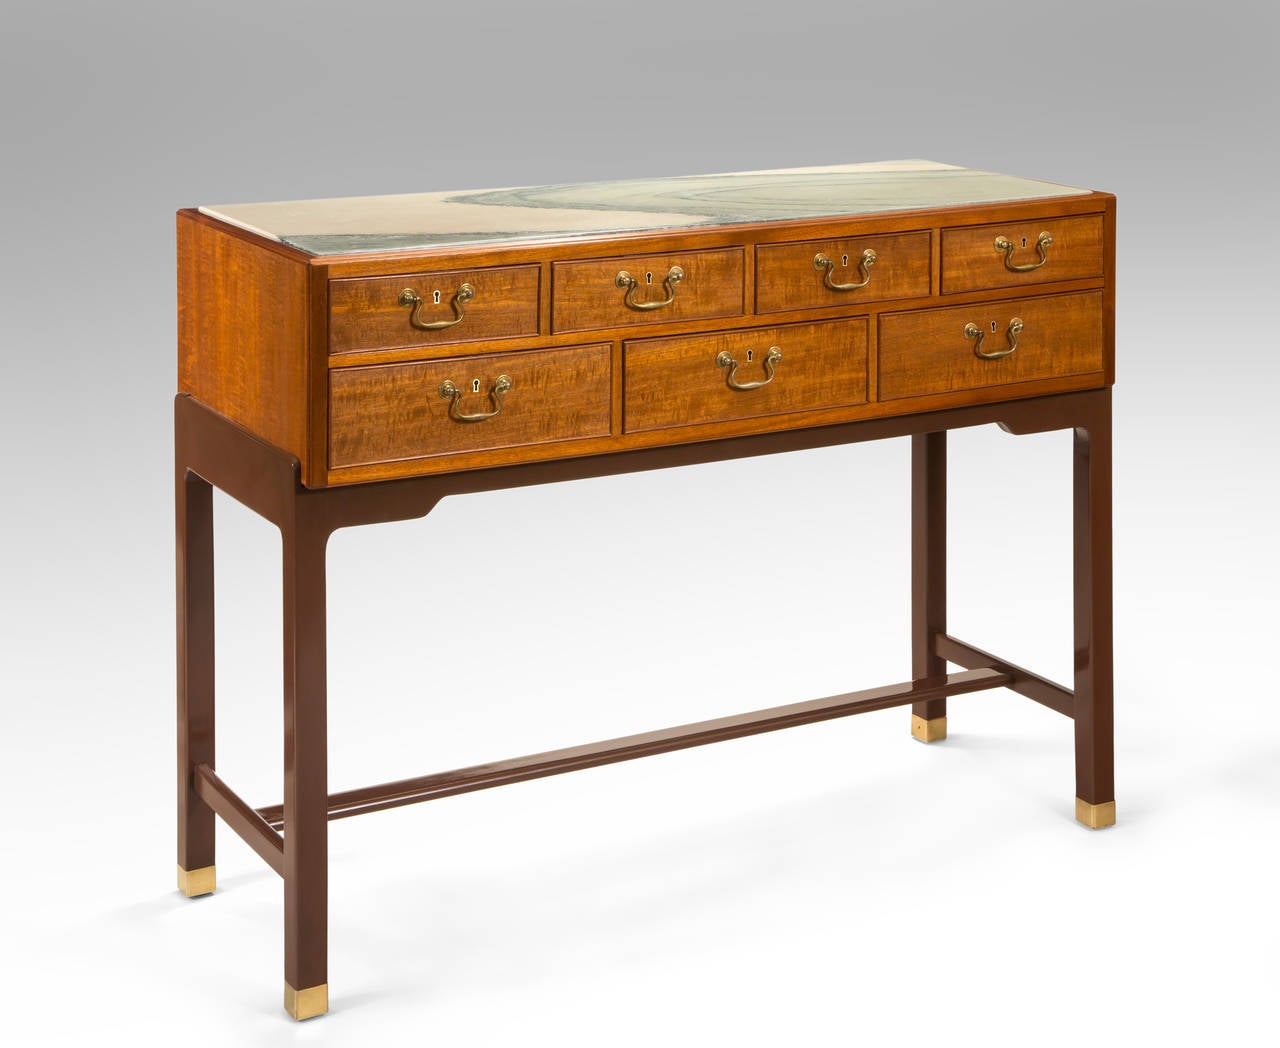 The dramatic green and white marble top, inset in a rectangular frame, above seven molded drawers each centering a keyhole and brass pull, on an umber lacquered stand with an H-shaped stretcher and brass feet

A related cabinet is illustrated by